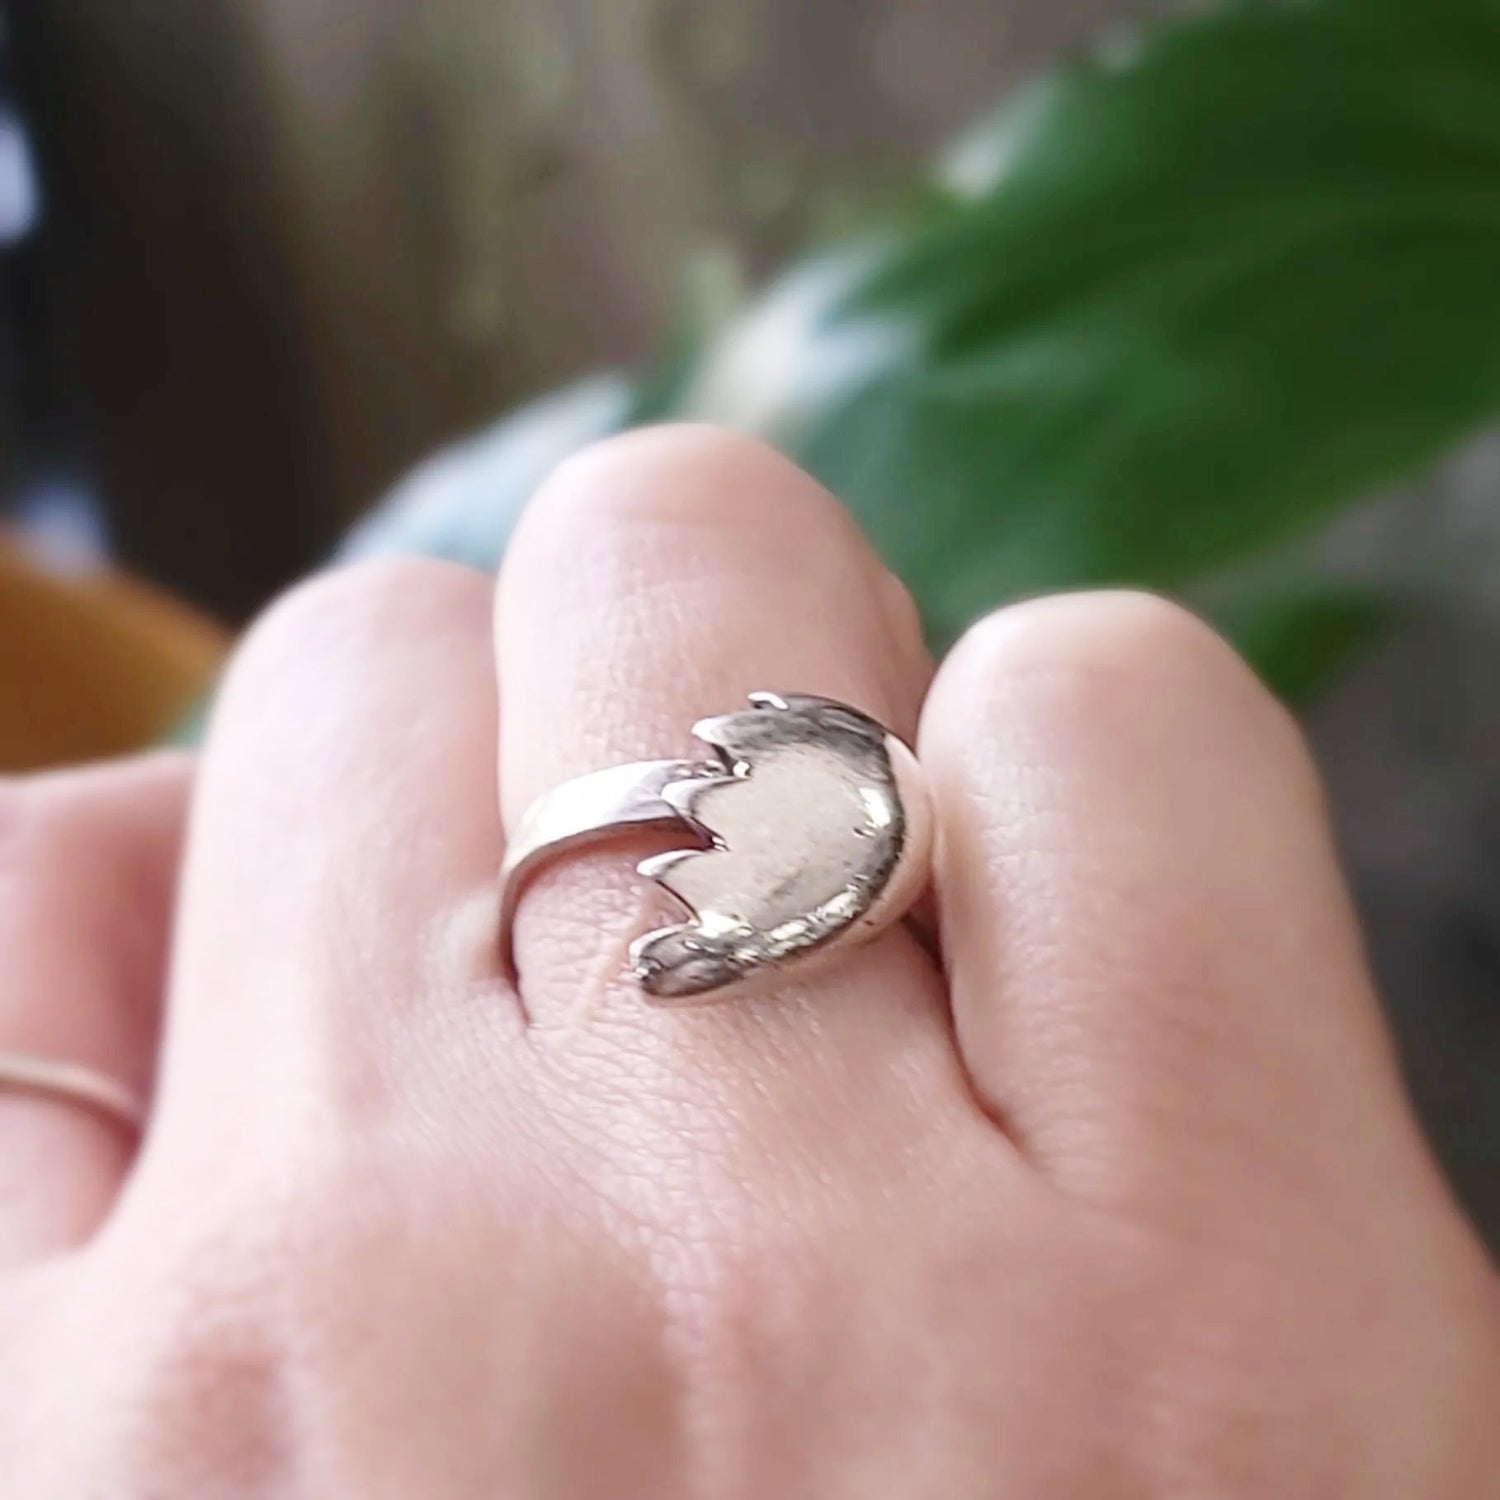 Broken Heart Half Heart Free Form Ring Sterling Silver Band - Elevated Metaphysical